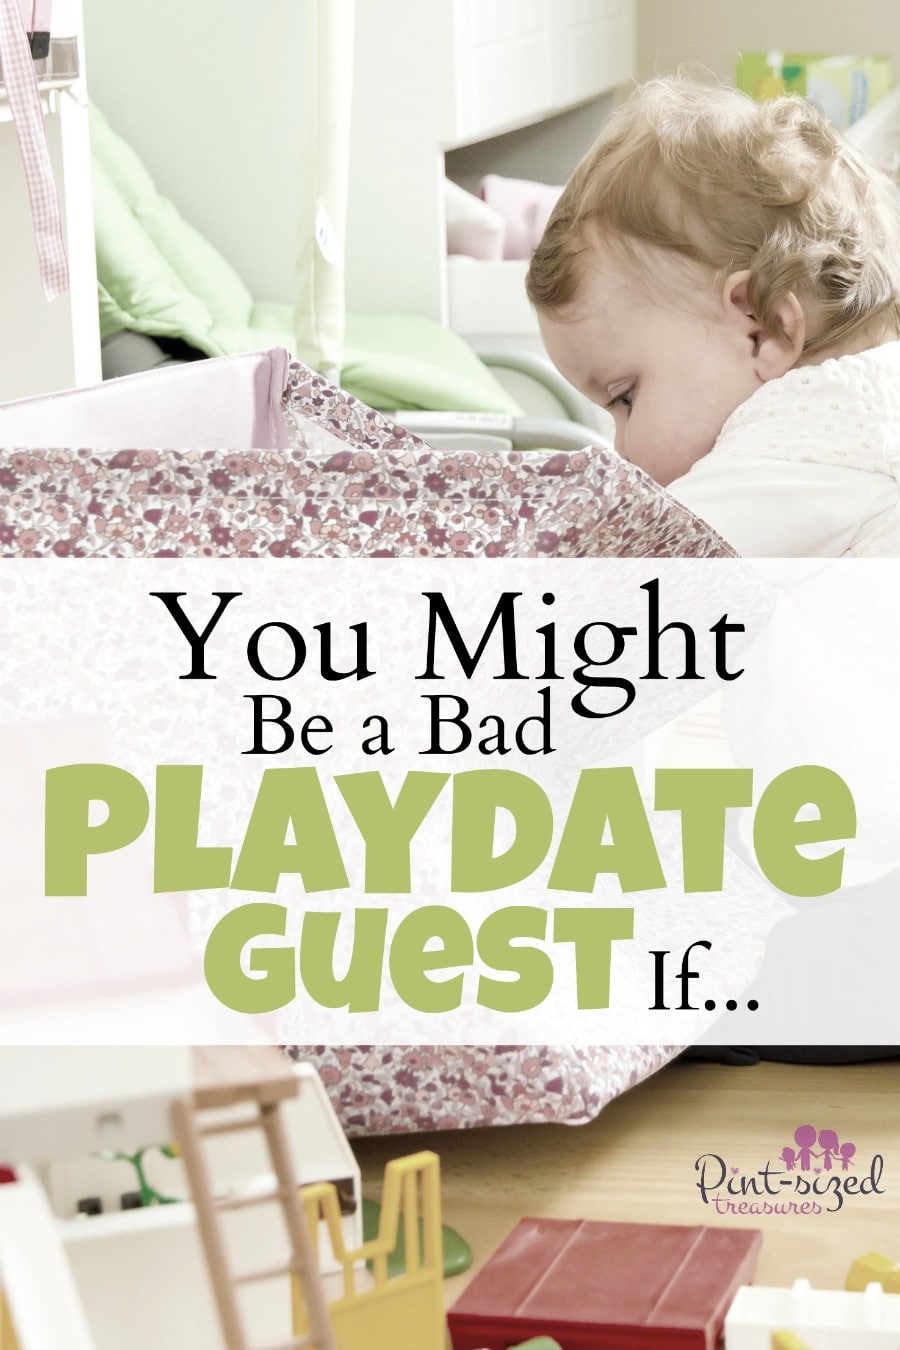 Are you a bad playdate guest? Find out!